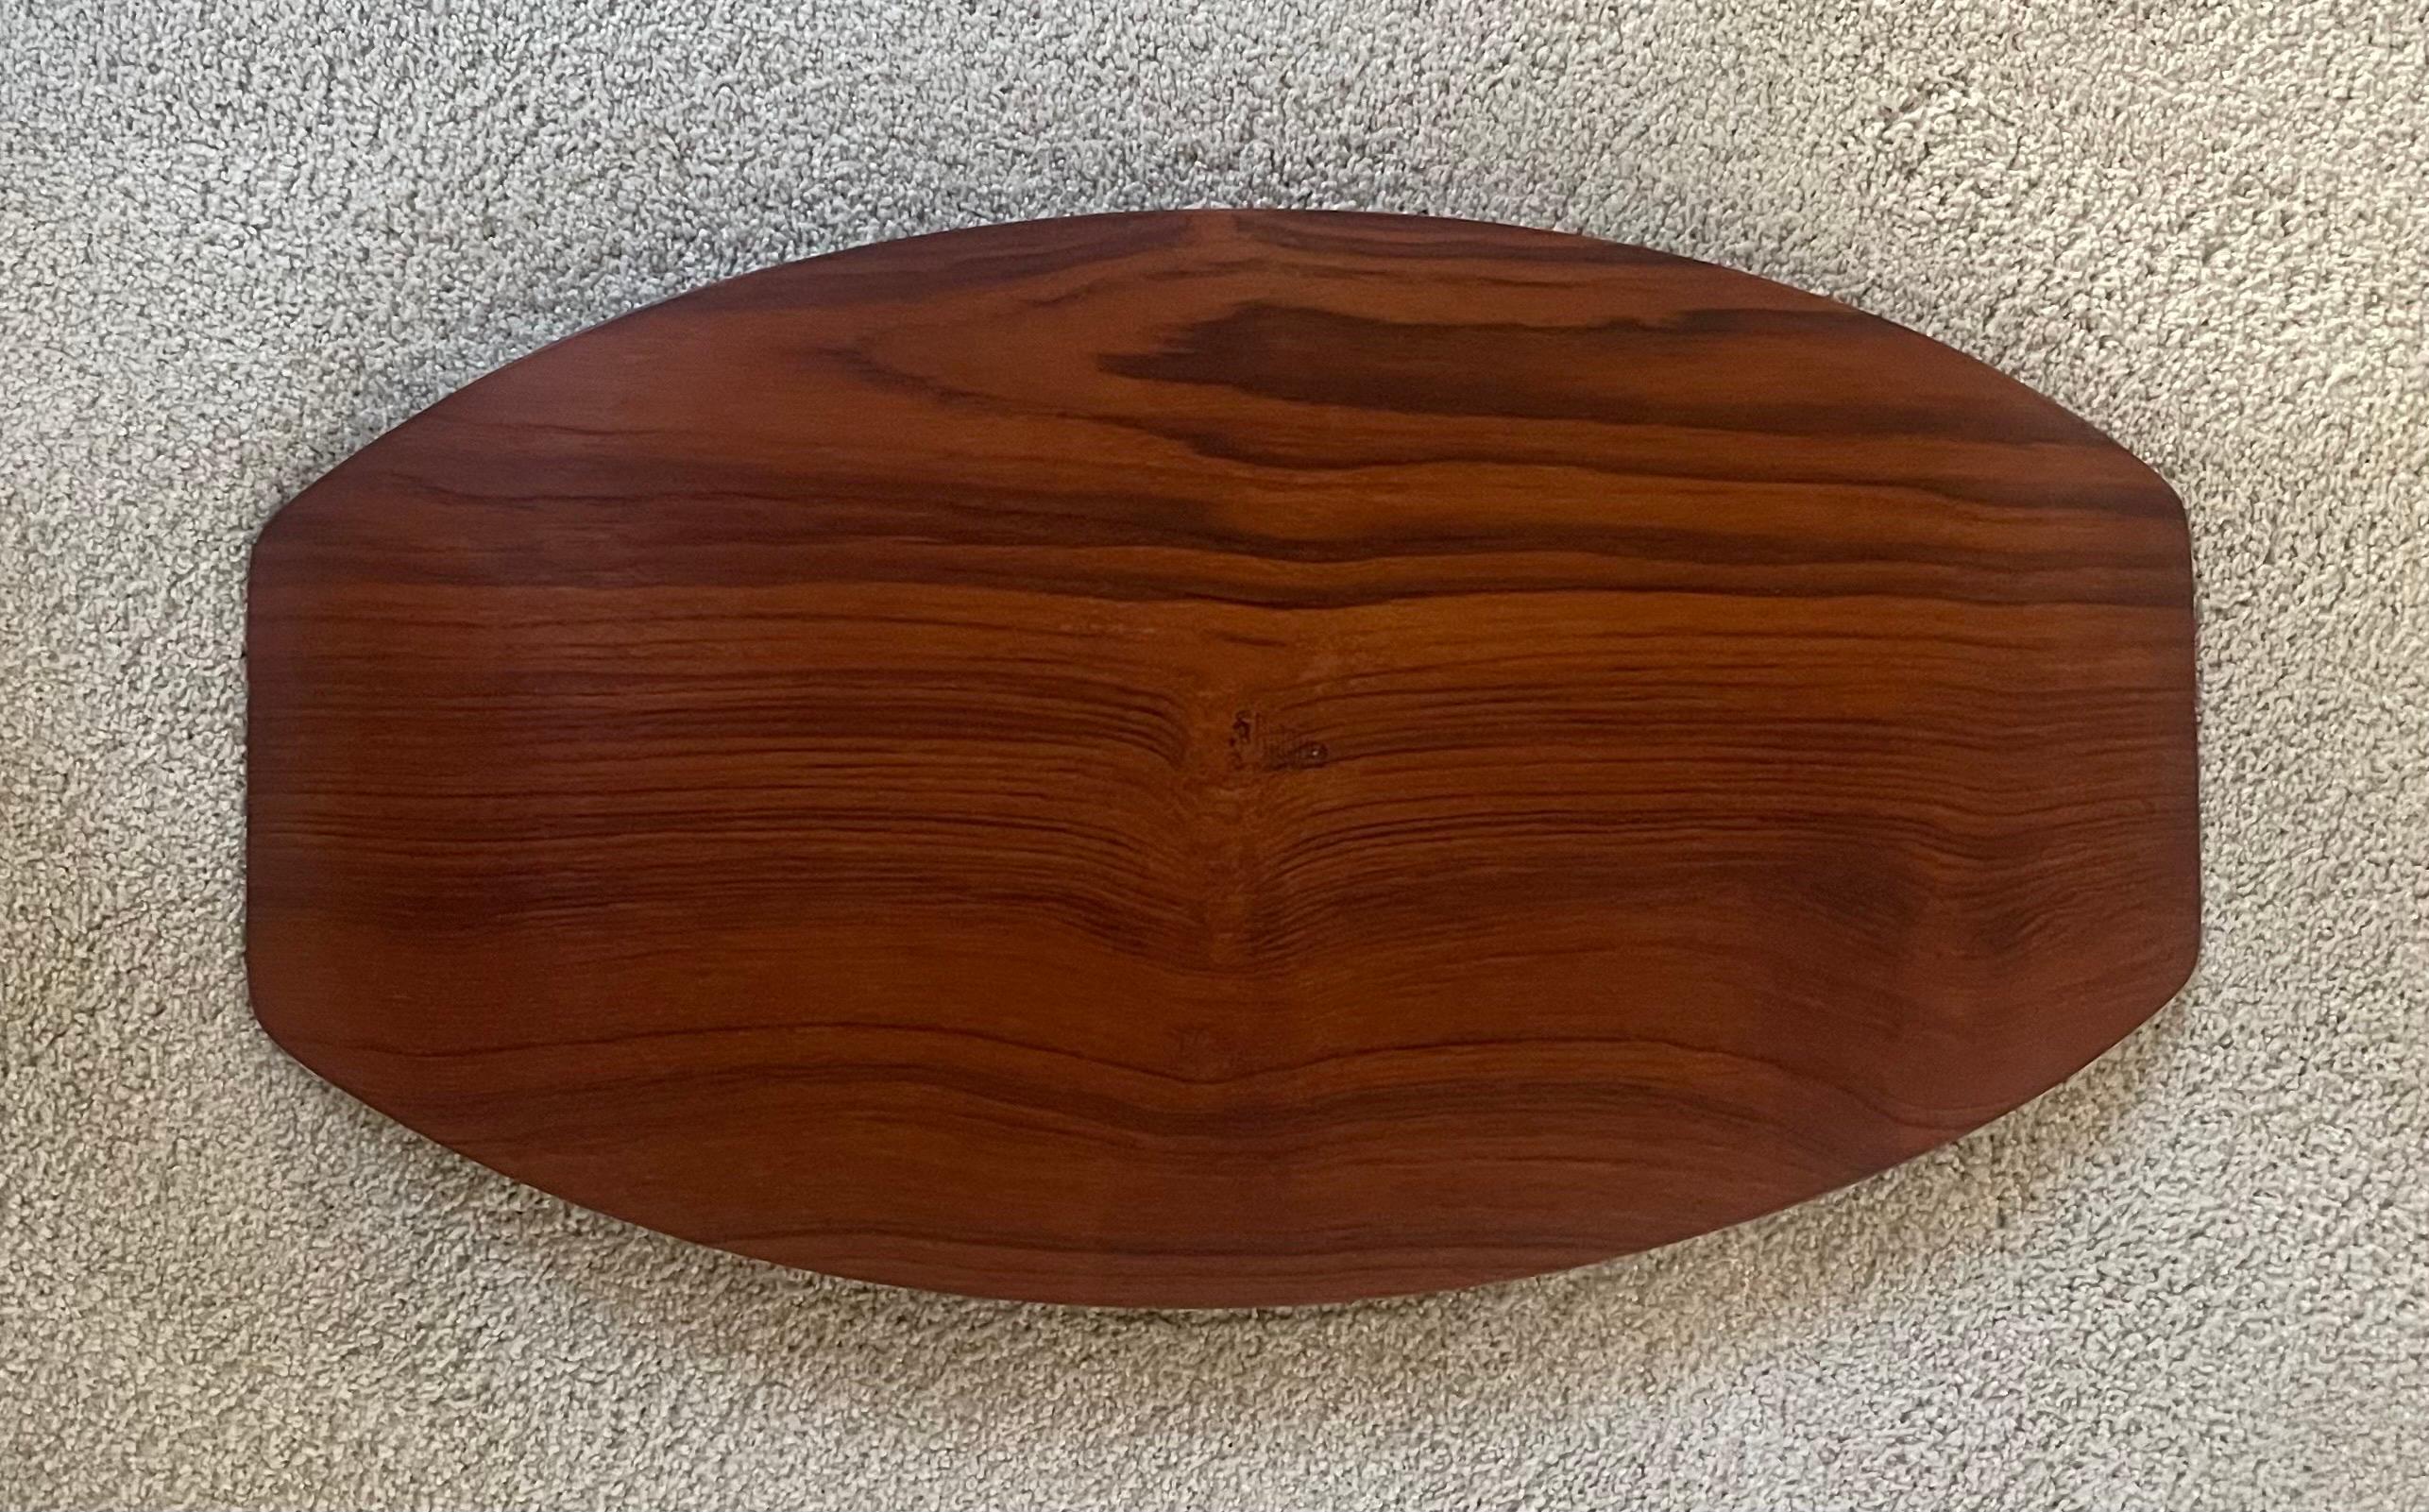 Large Solid Teak Surfboard Tray with Raised Edge by Digsmed - Rare For Sale 2